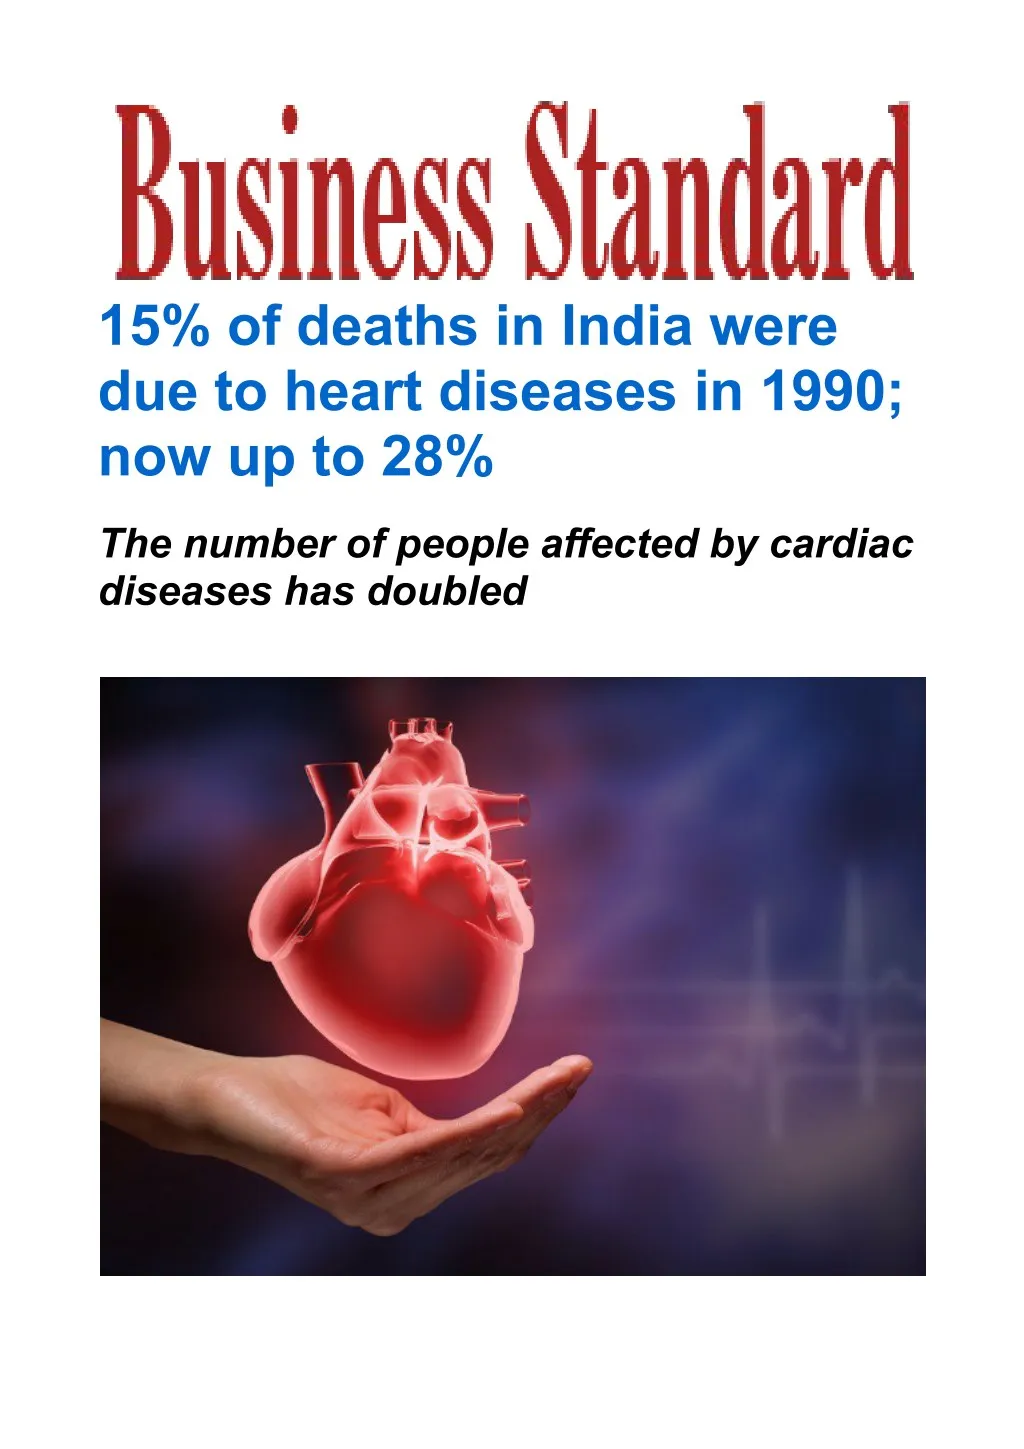 15 of deaths in india were due to heart diseases